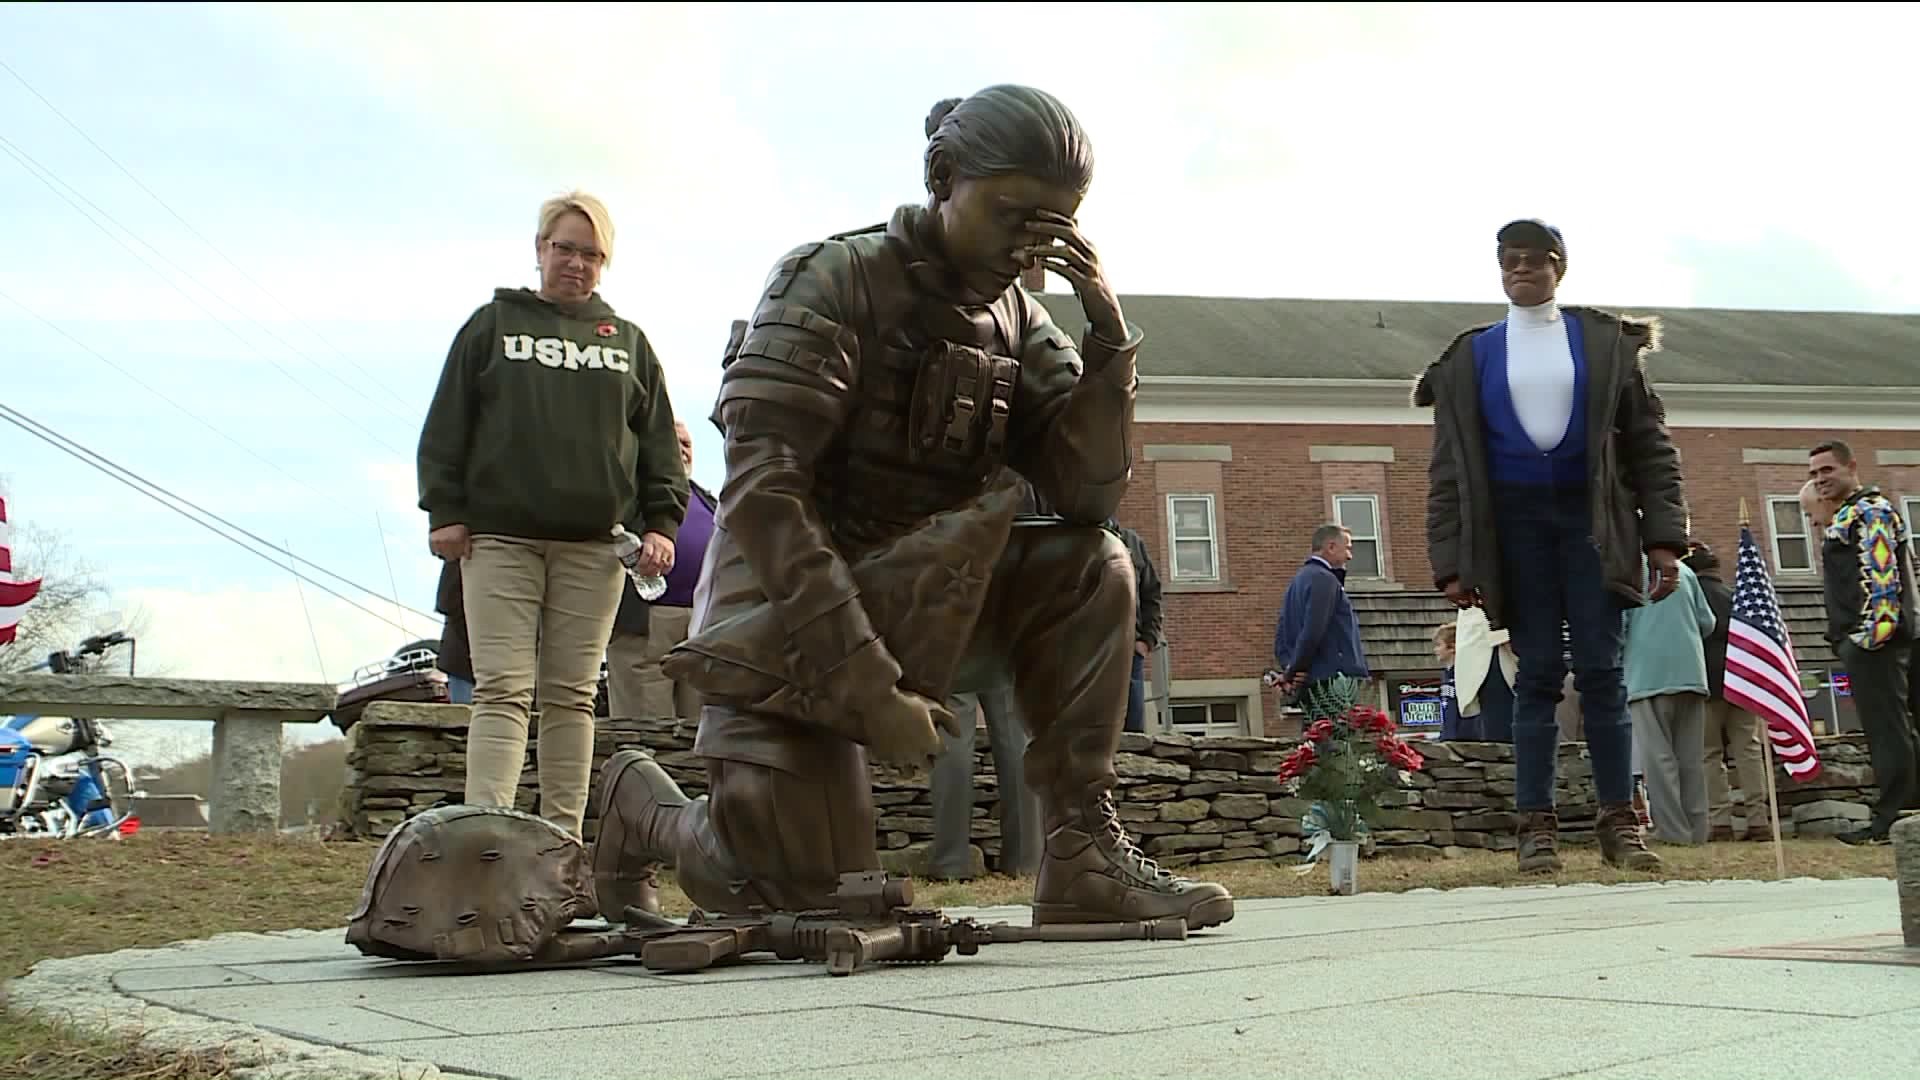 Statue honors female combat soldiers in Sprague, CT